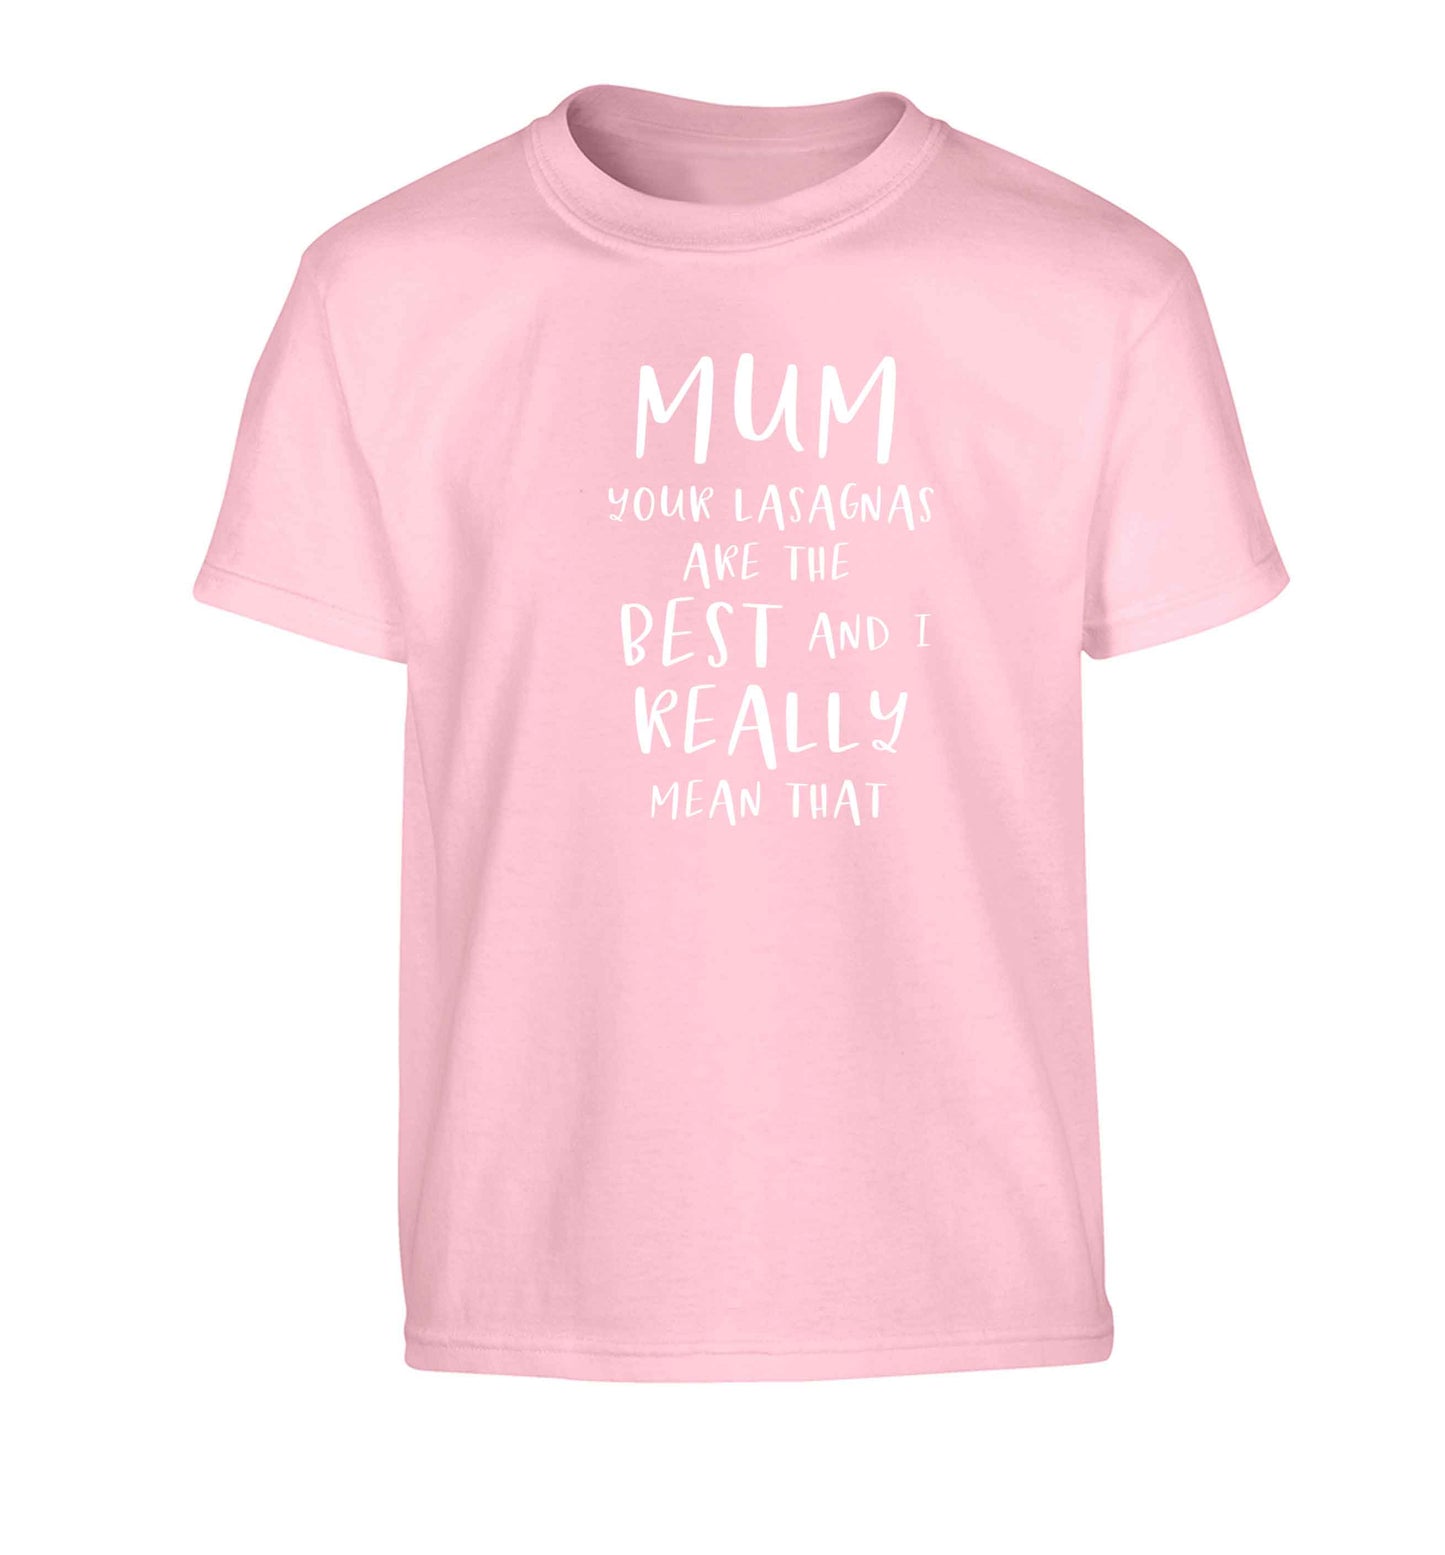 Funny gifts for your mum on mother's dayor her birthday! Mum your lasagnas are the best and I really mean that Children's light pink Tshirt 12-13 Years